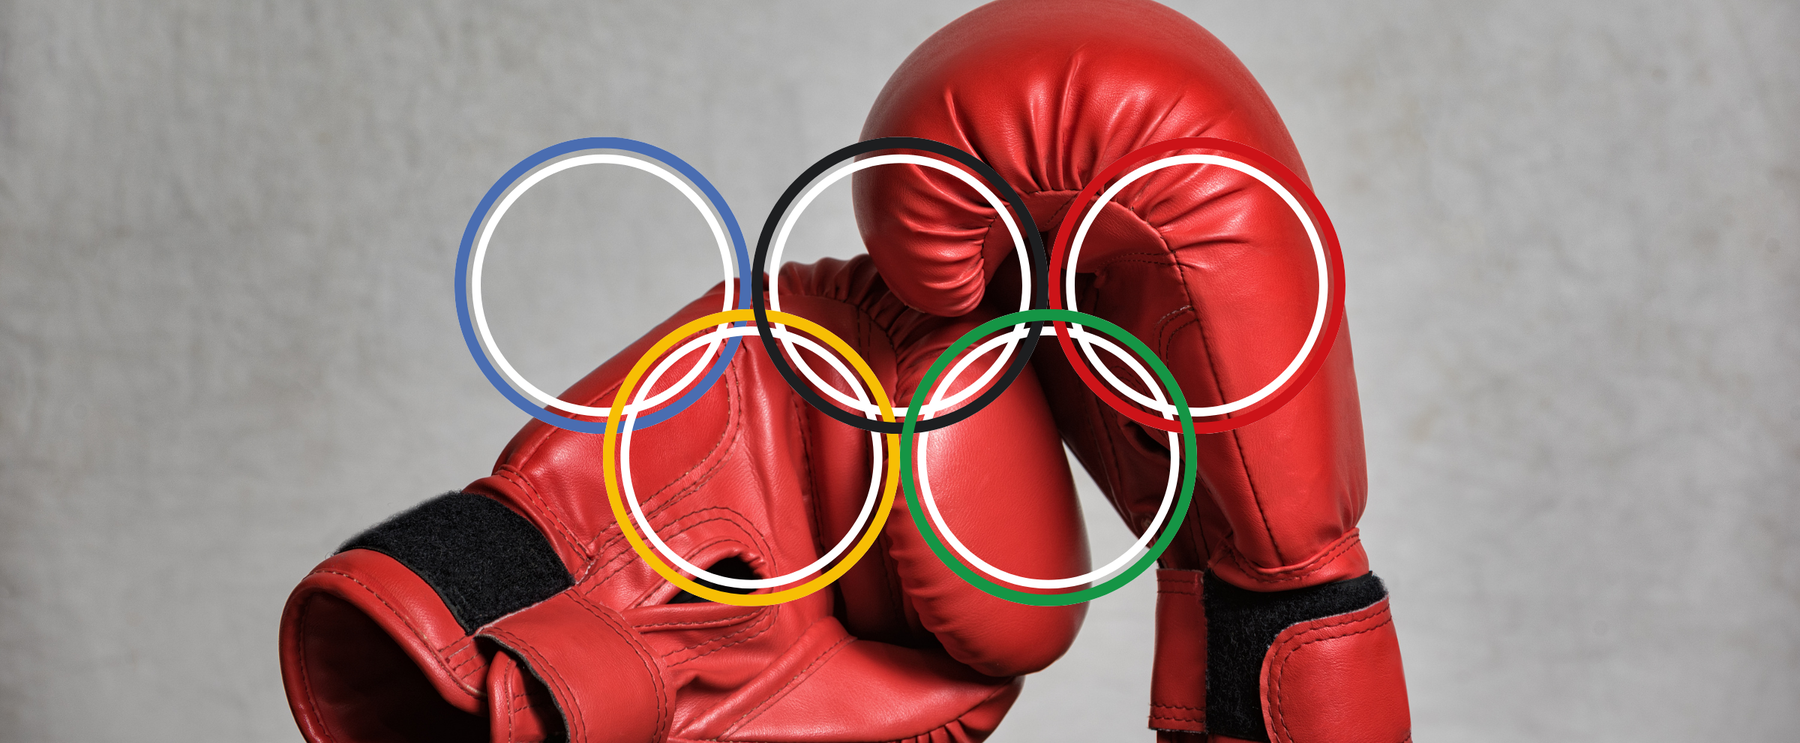 The Fate of Boxing For The 2028 LA Olympics